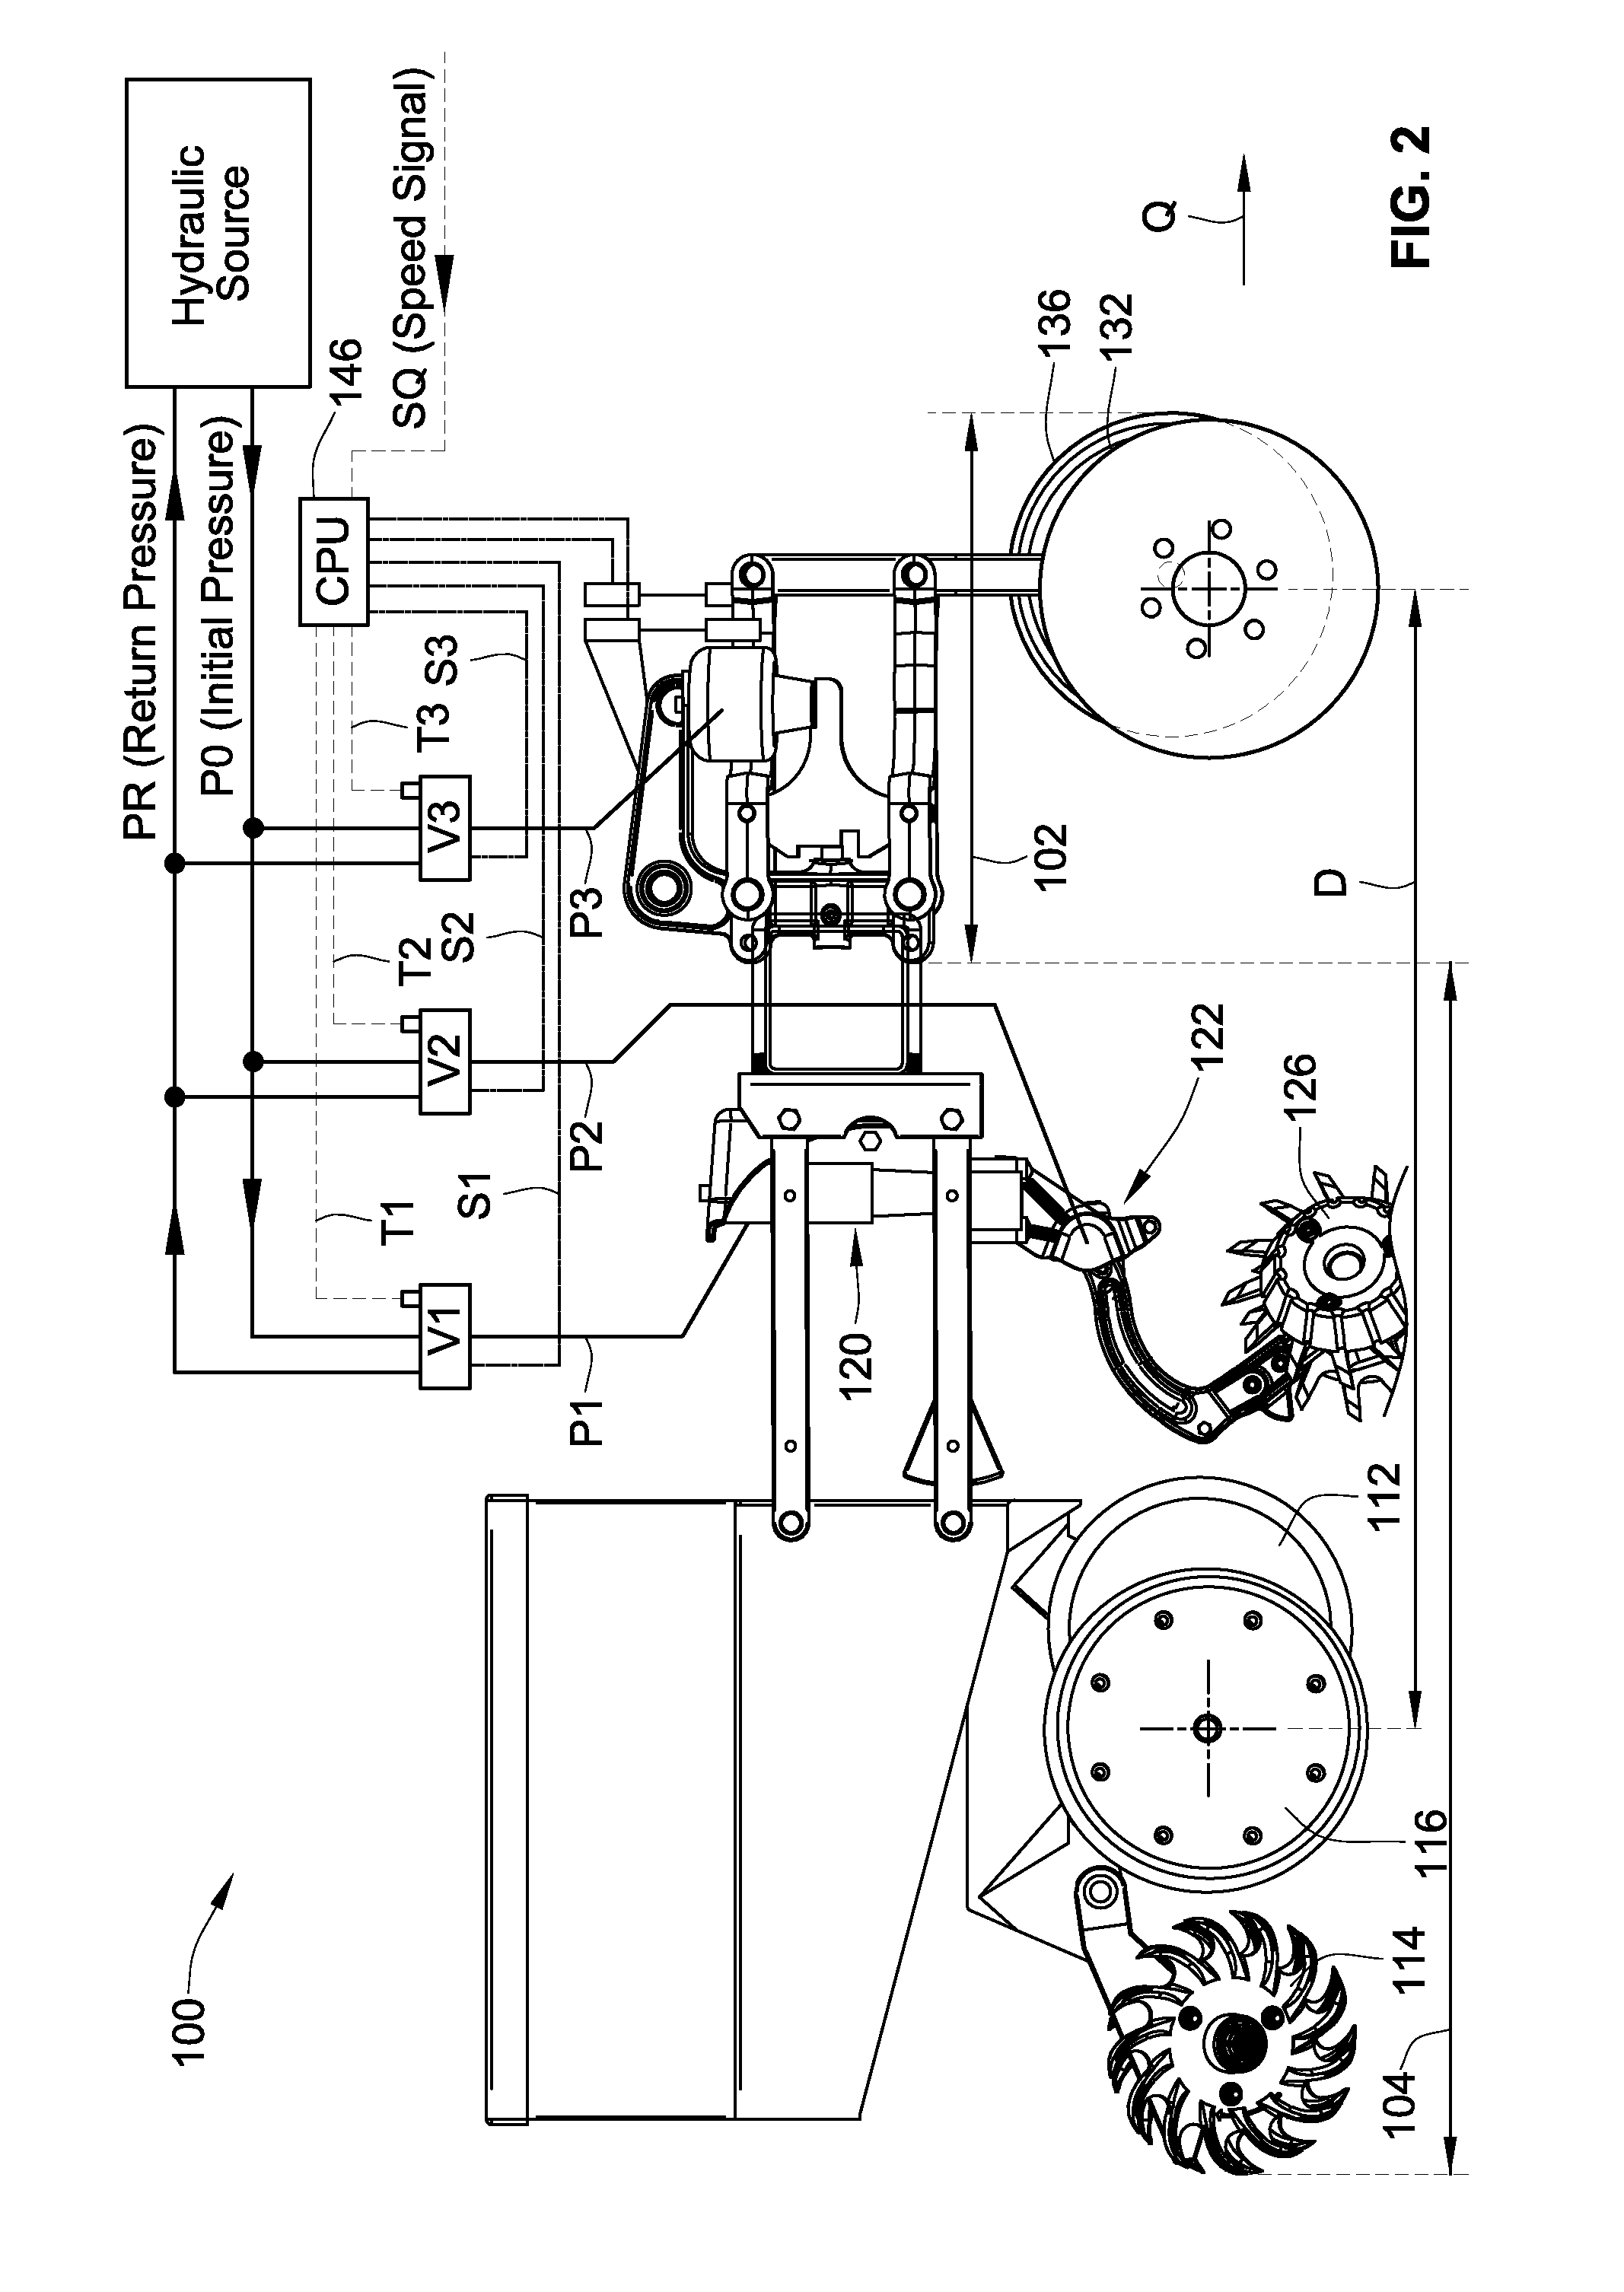 Agricultural Apparatus For Sensing And Providing Feedback Of Soil Property Changes In Real Time